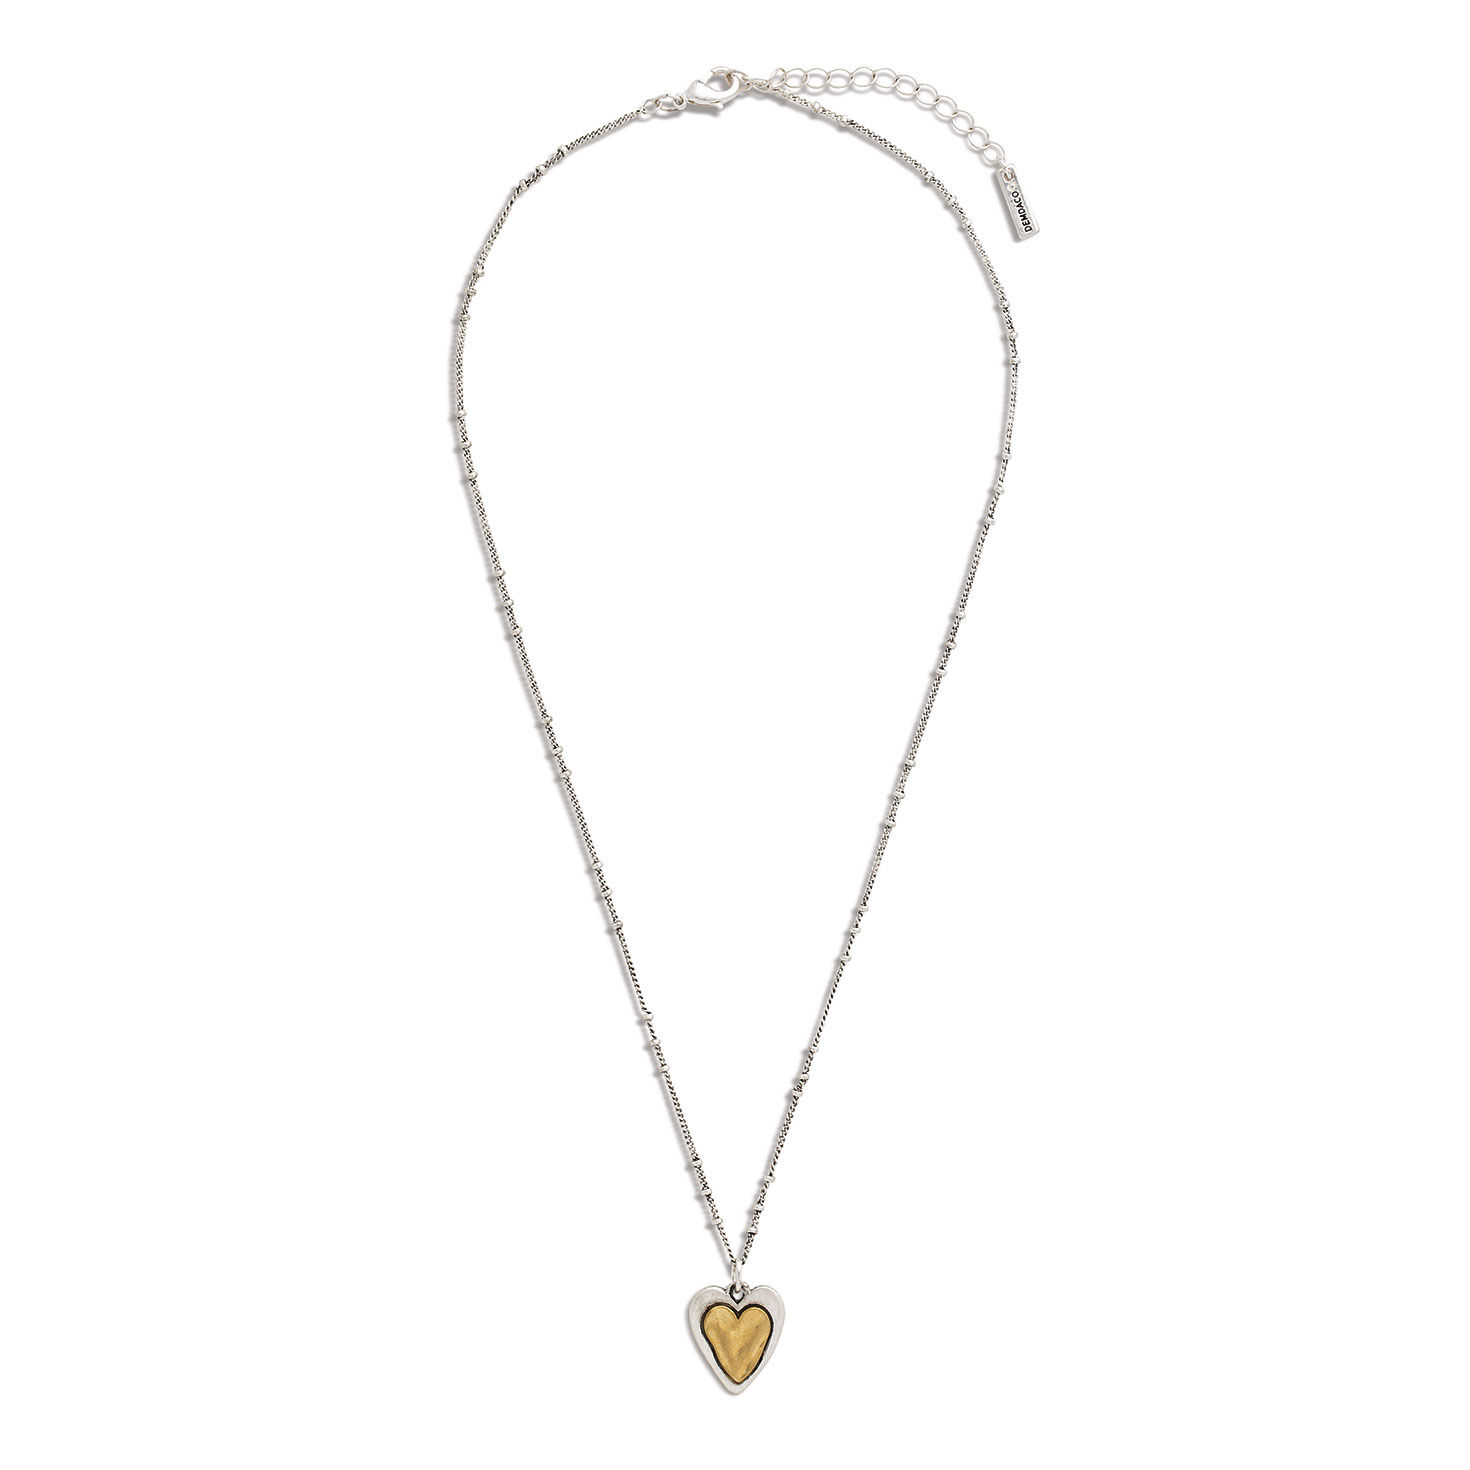 Demdaco Heart Charm Guardian Angel Necklace, 18" for only USD 29.99 | Hallmark